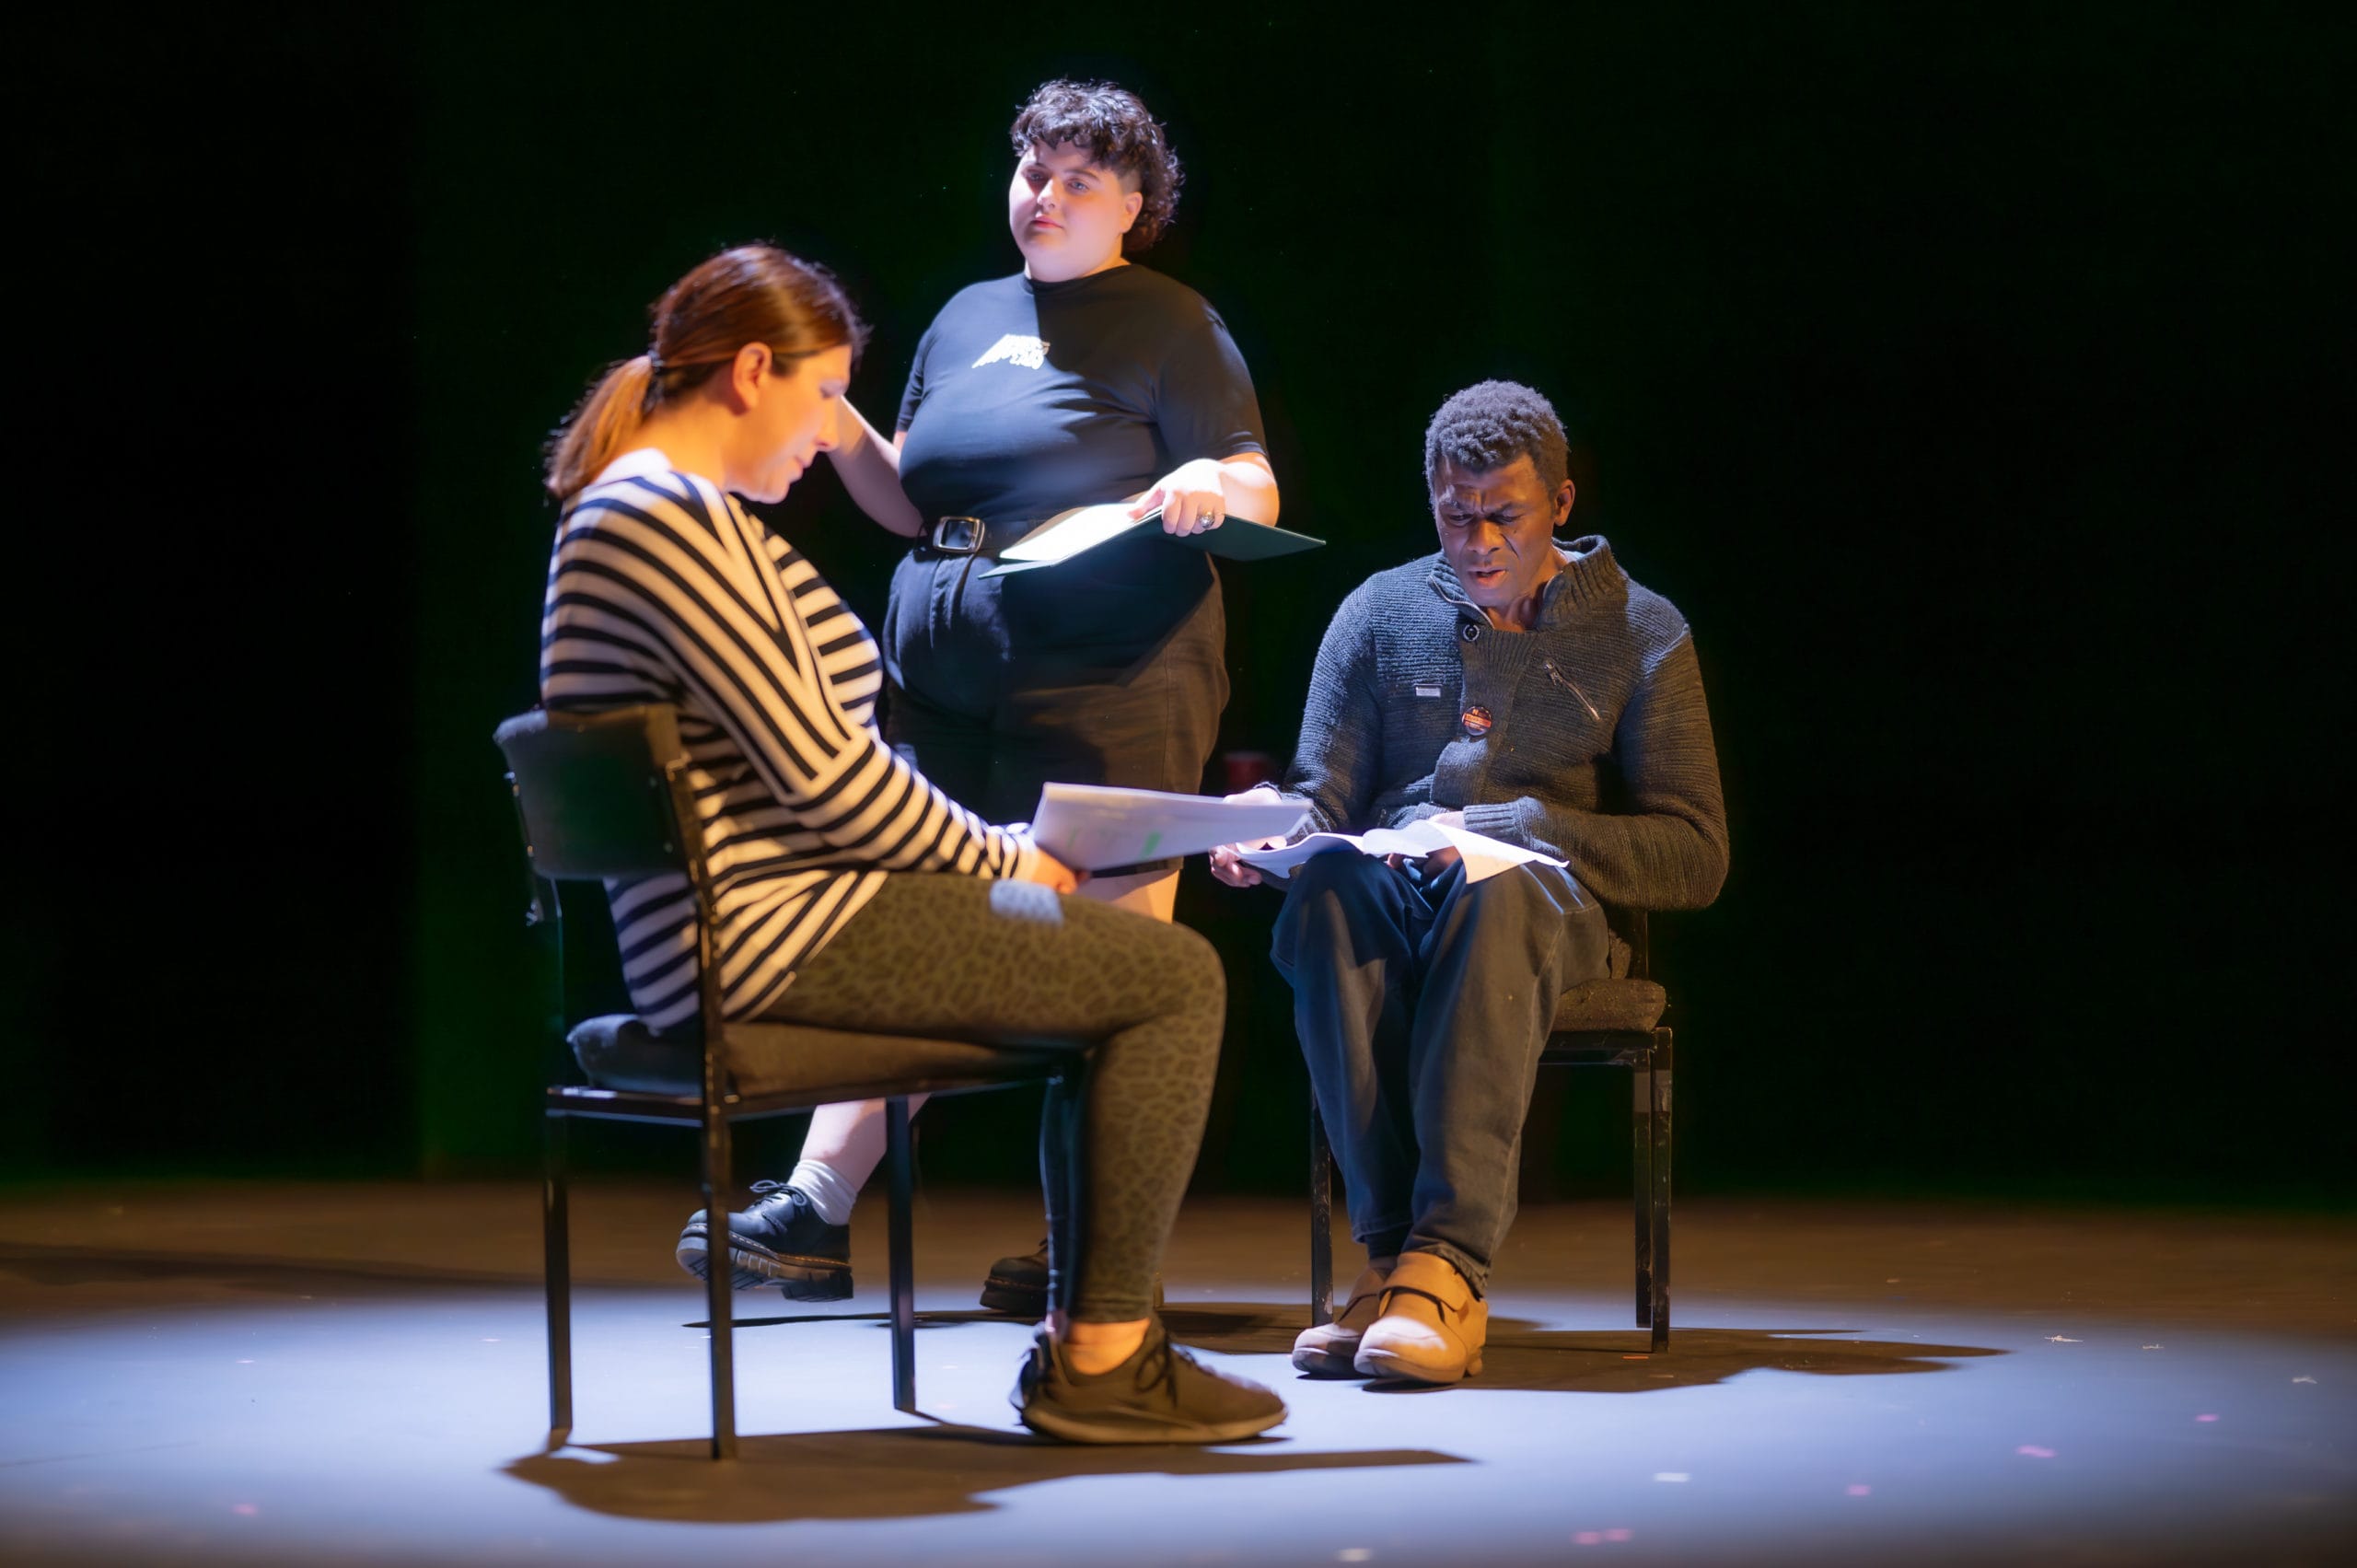 Three performers on stage (all holding scripts). Two are seated and appear to be deep in conversation, the third is stood behind them appearing to take notes.